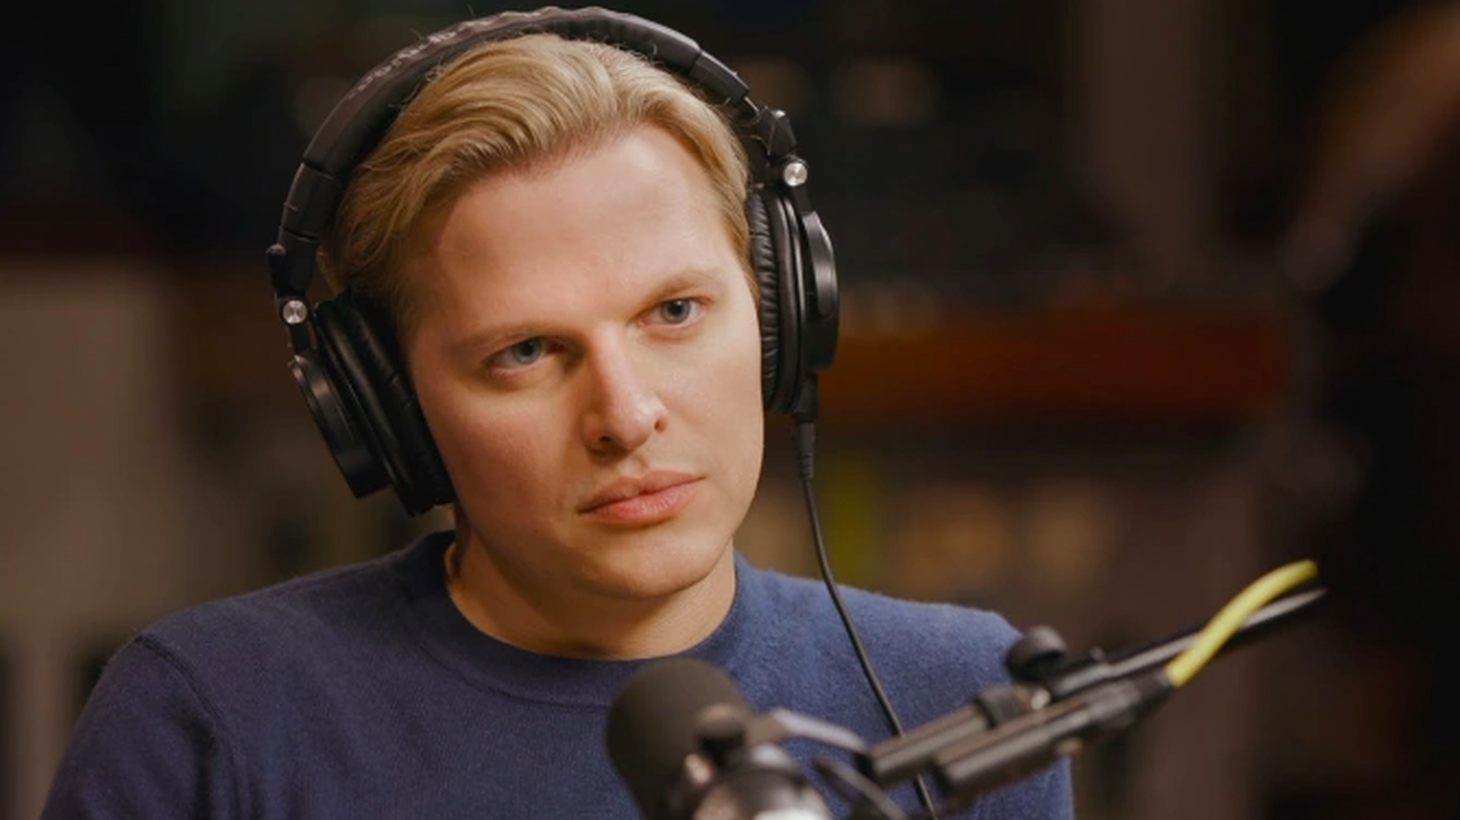 Ronan Farrow on HBO’s “Catch and Kill: The Podcast Tapes,” documentary series.